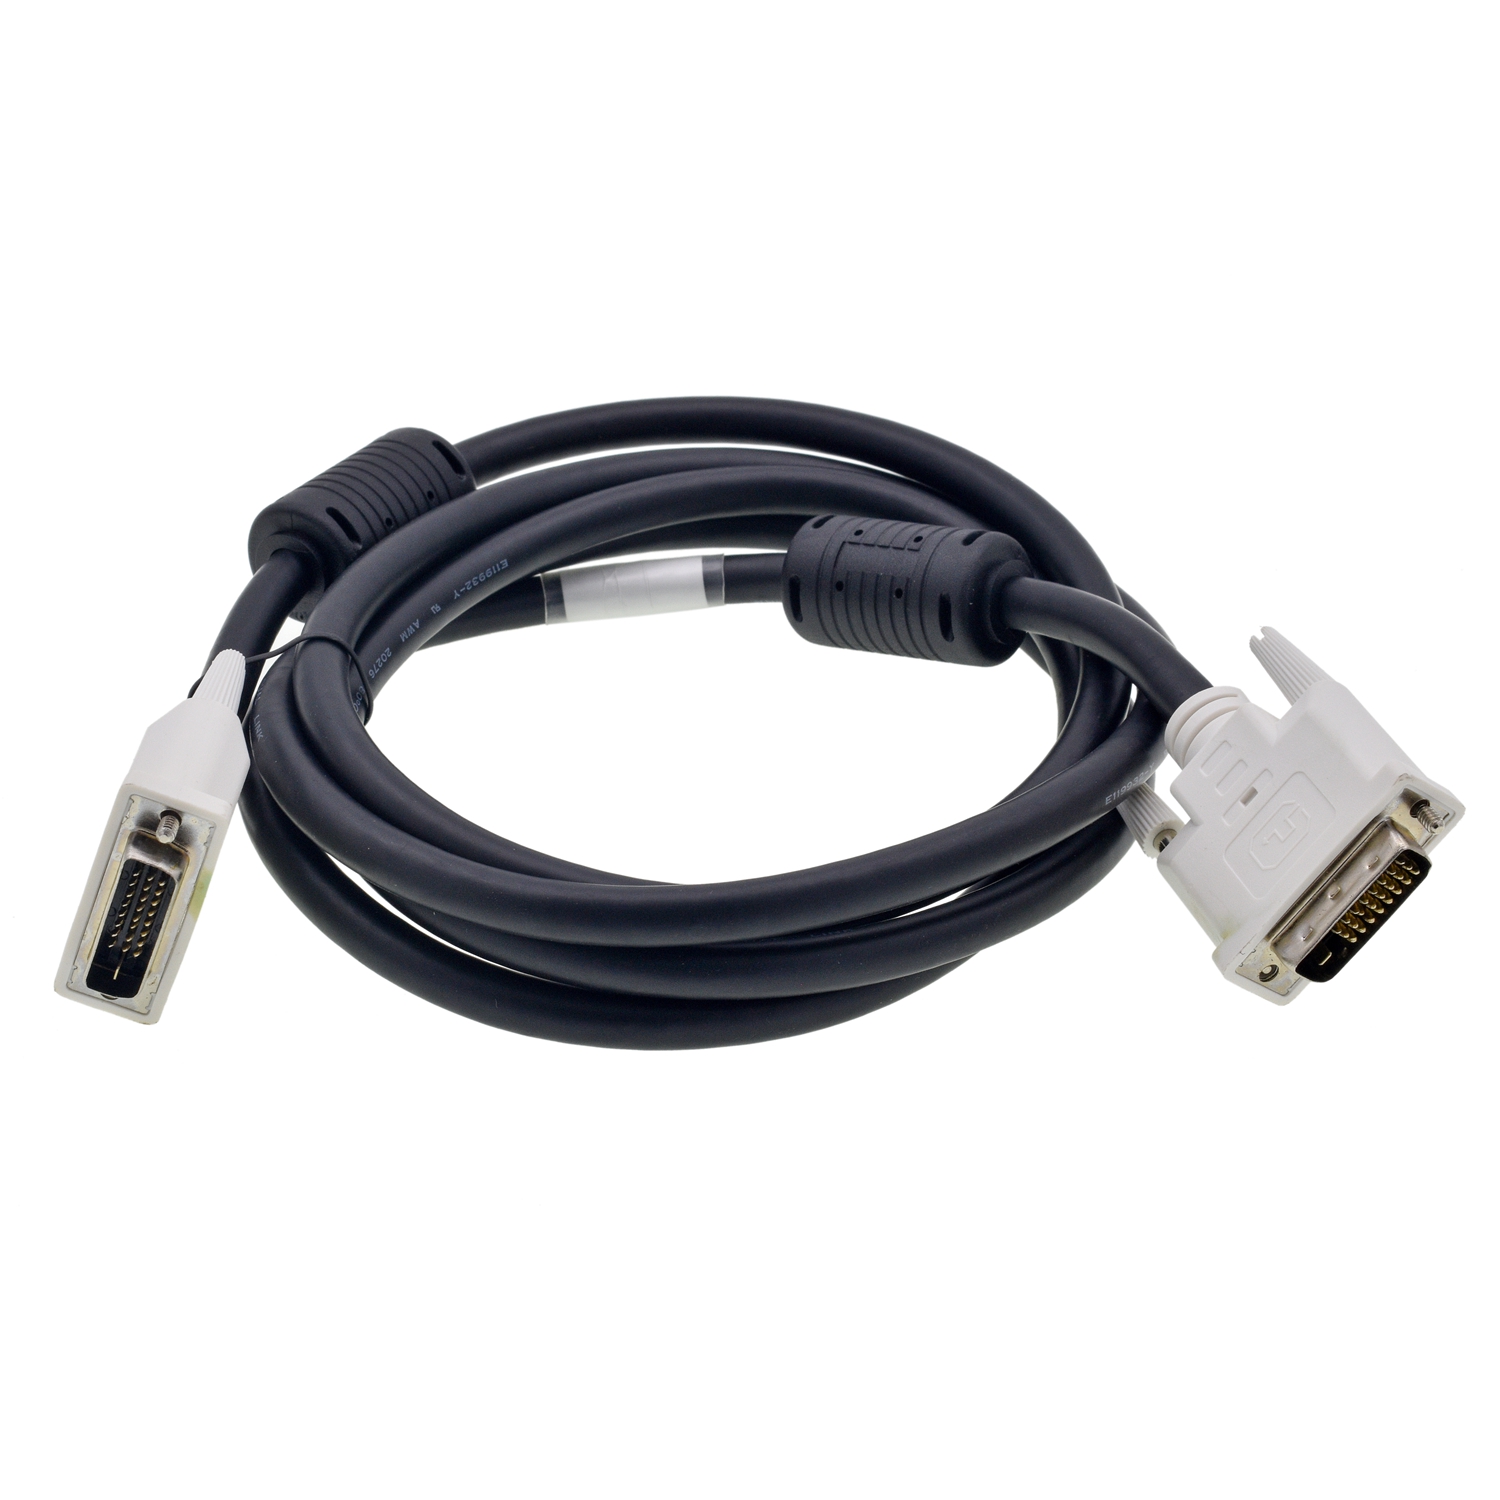 VGA Cable Extension Cable Converter with Ferrite Core OEM 